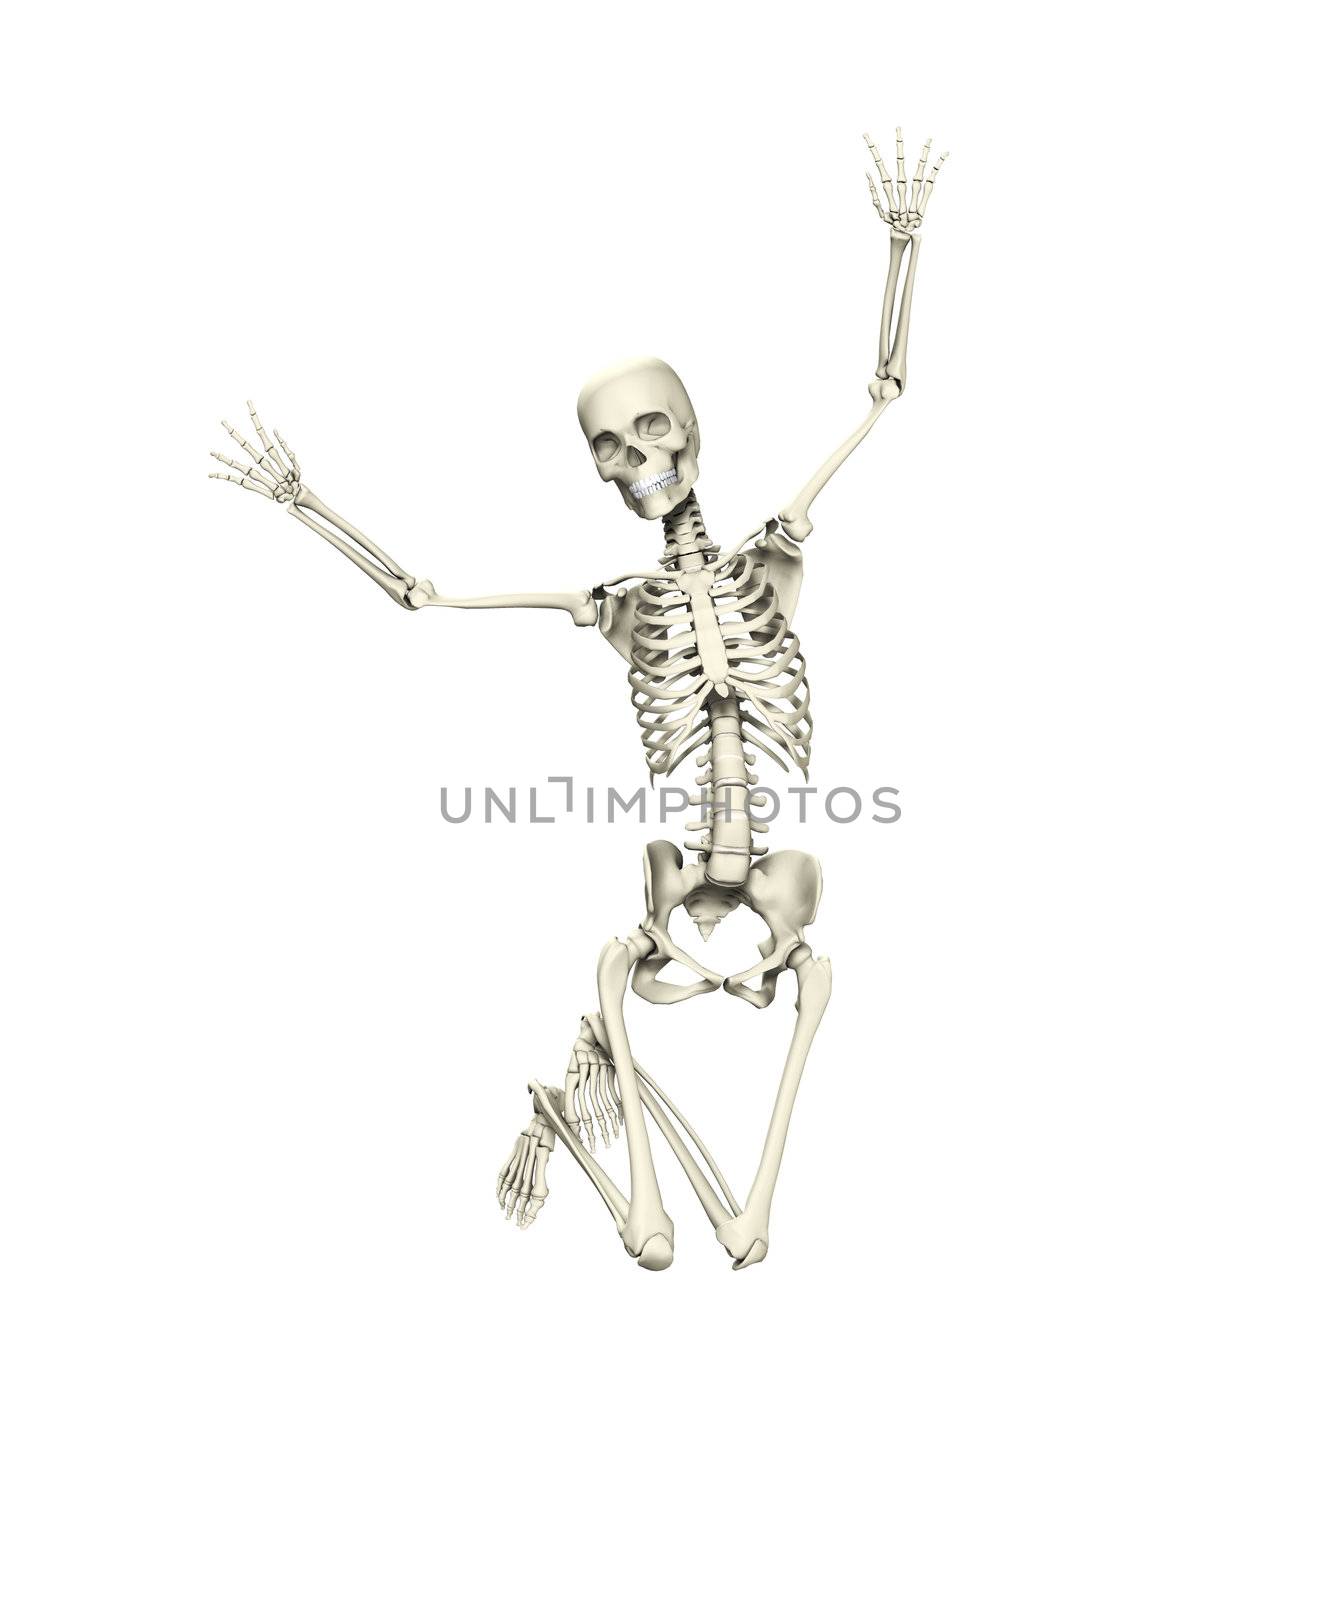 Skeleton that is jumping for joy with happiness.